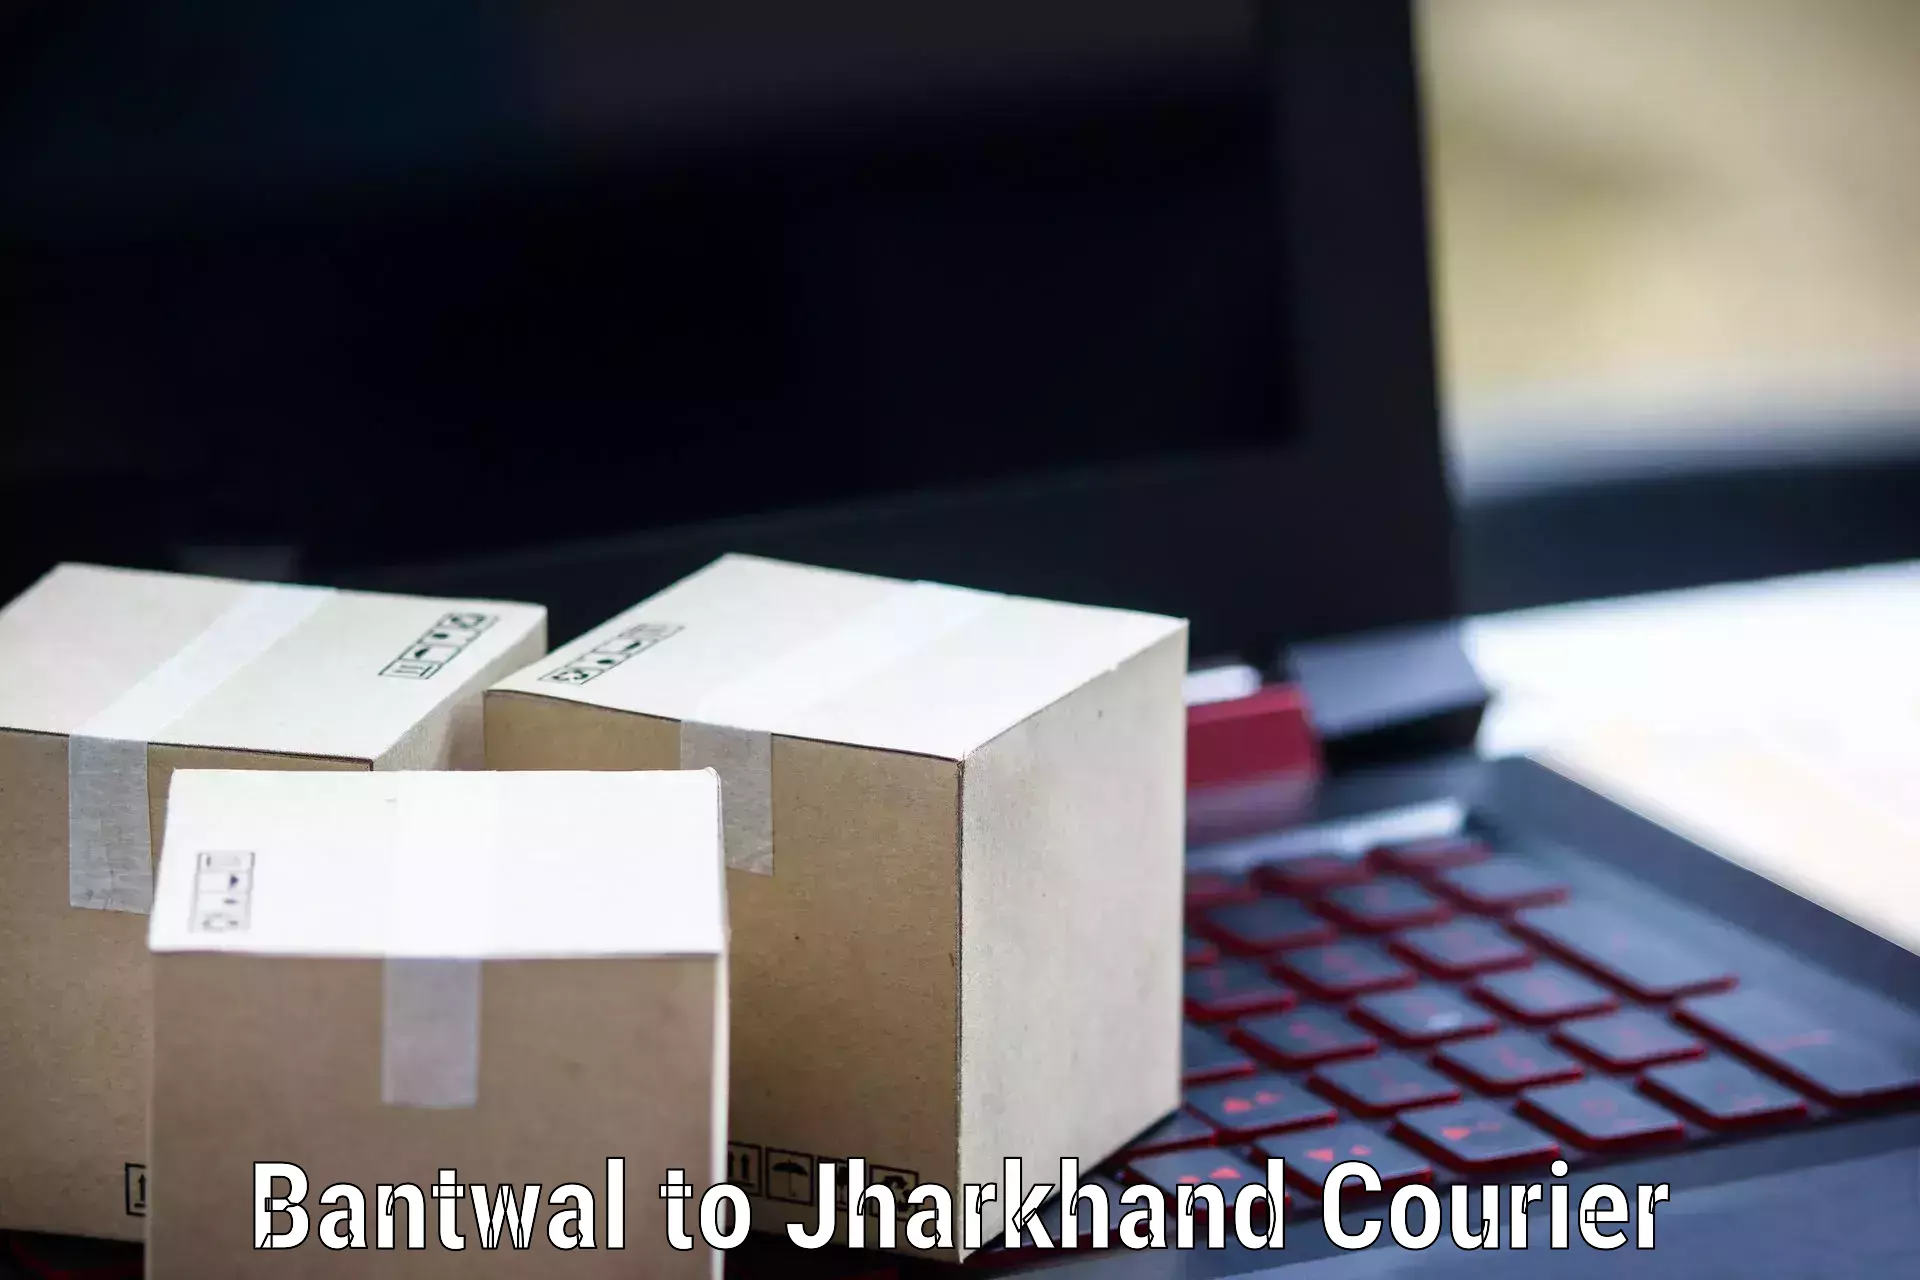 24-hour delivery options Bantwal to Tamar